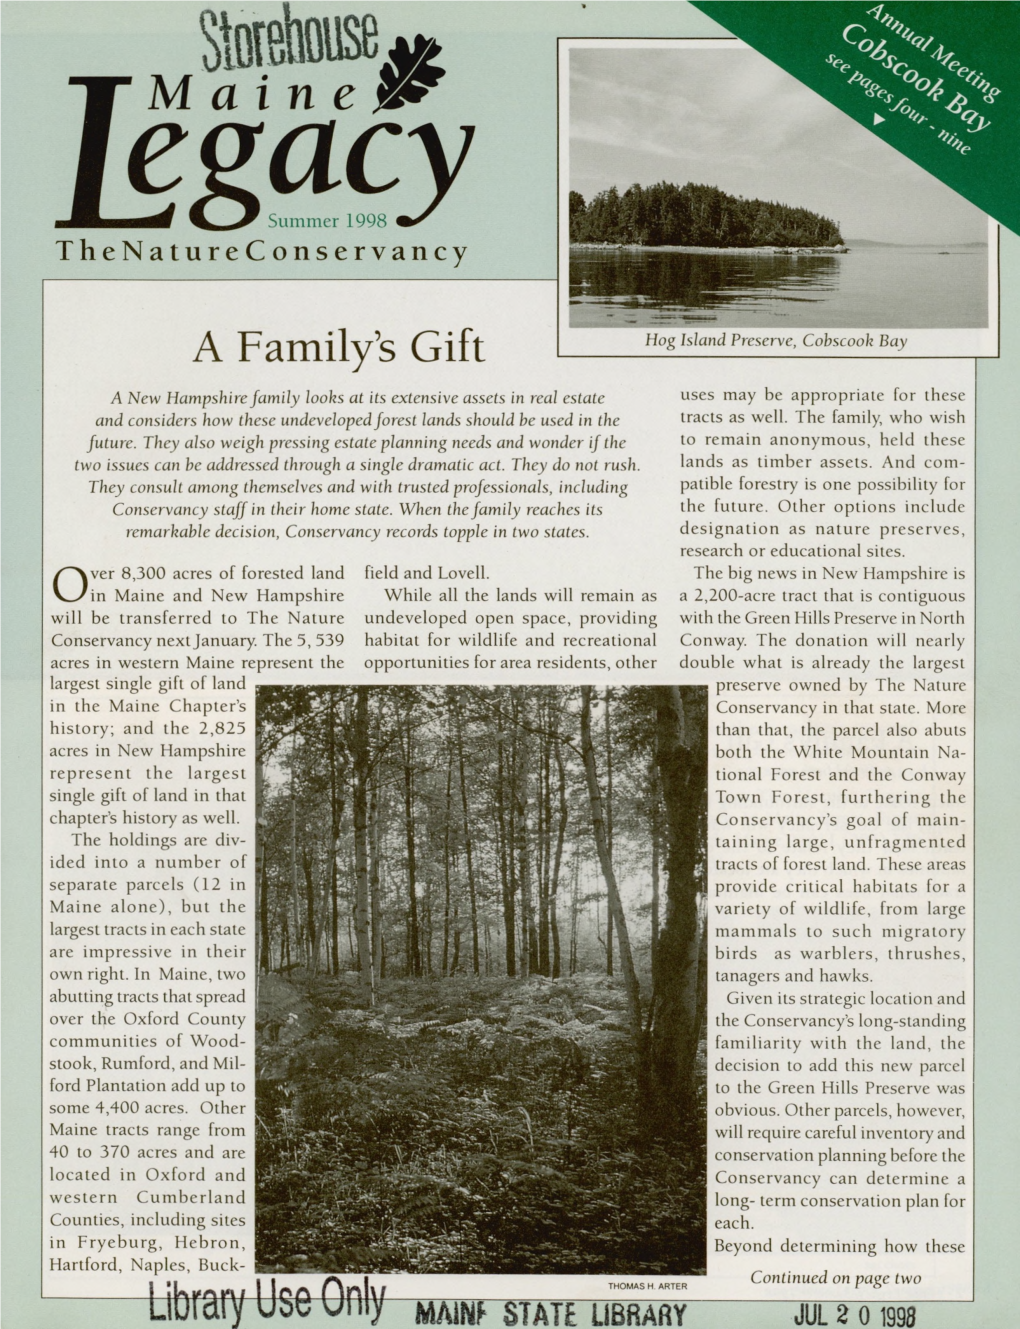 Maine Legacy, Summer 1998 Significant Conservation Value